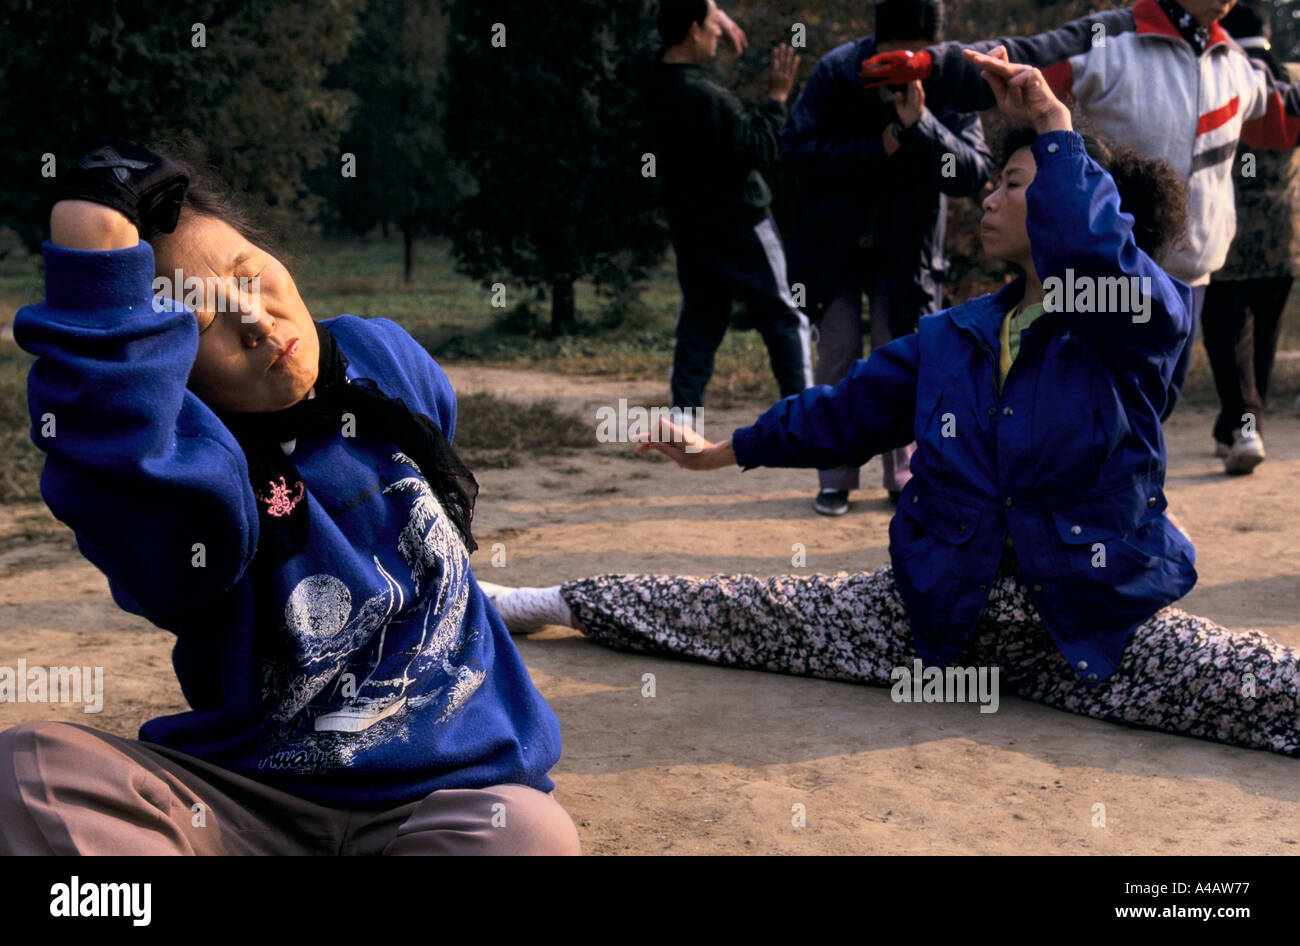 Beijing, China 1997:  Women takes part in a Tai Chi class in the early morning at Ritan park Stock Photo